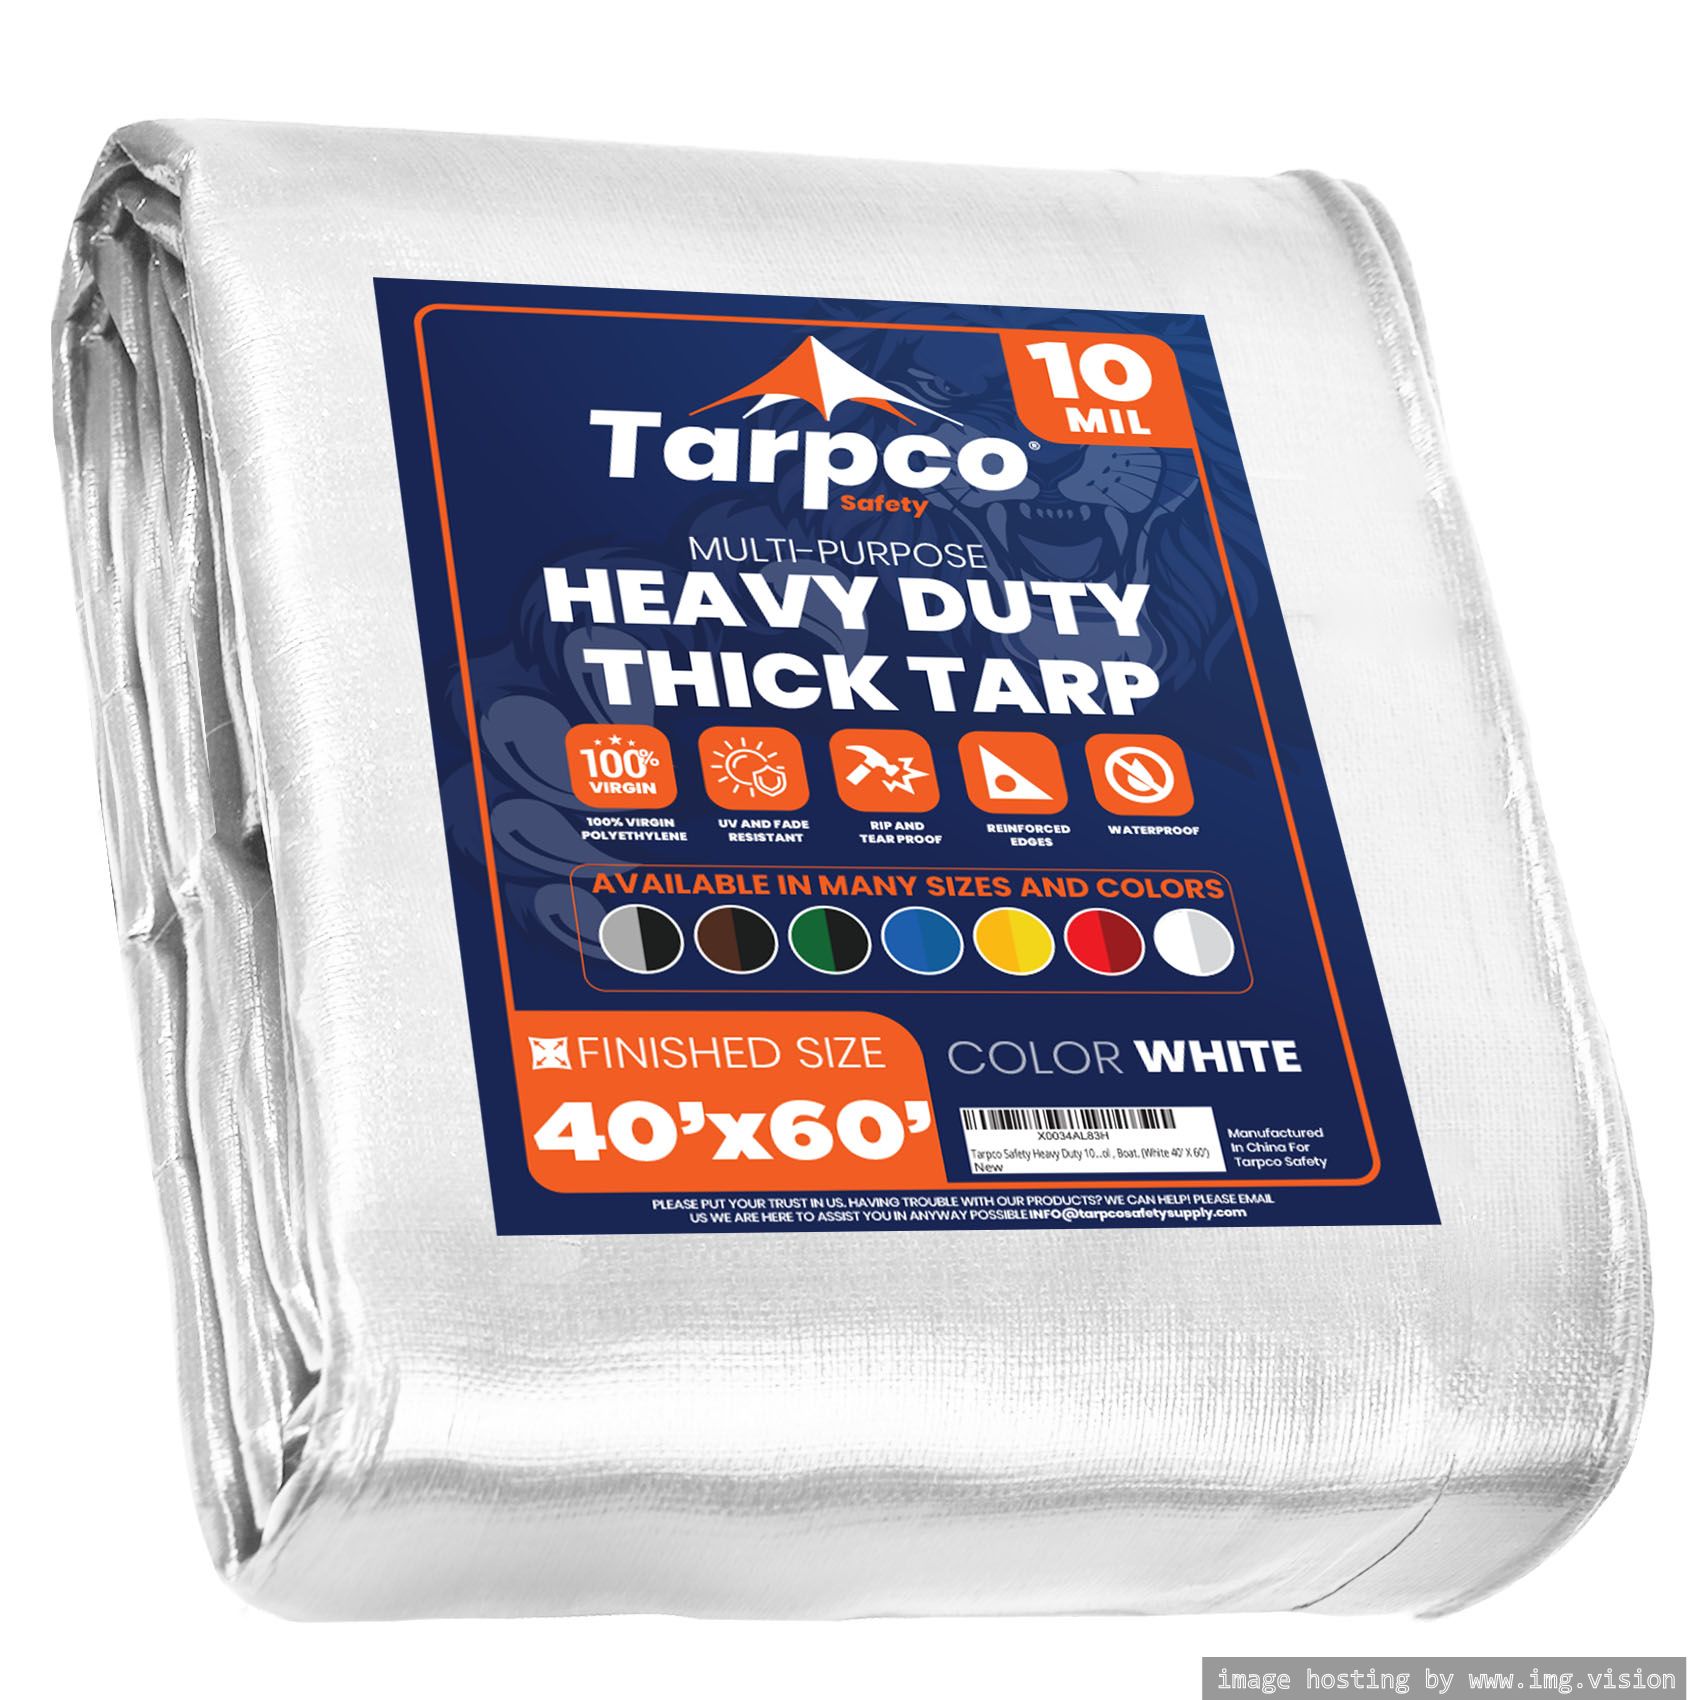 Tarpco Safety Heavy Duty 10 Mil Tarp Cover 40′ X 60′ White UV Resistant, Rip and Tear Proof.